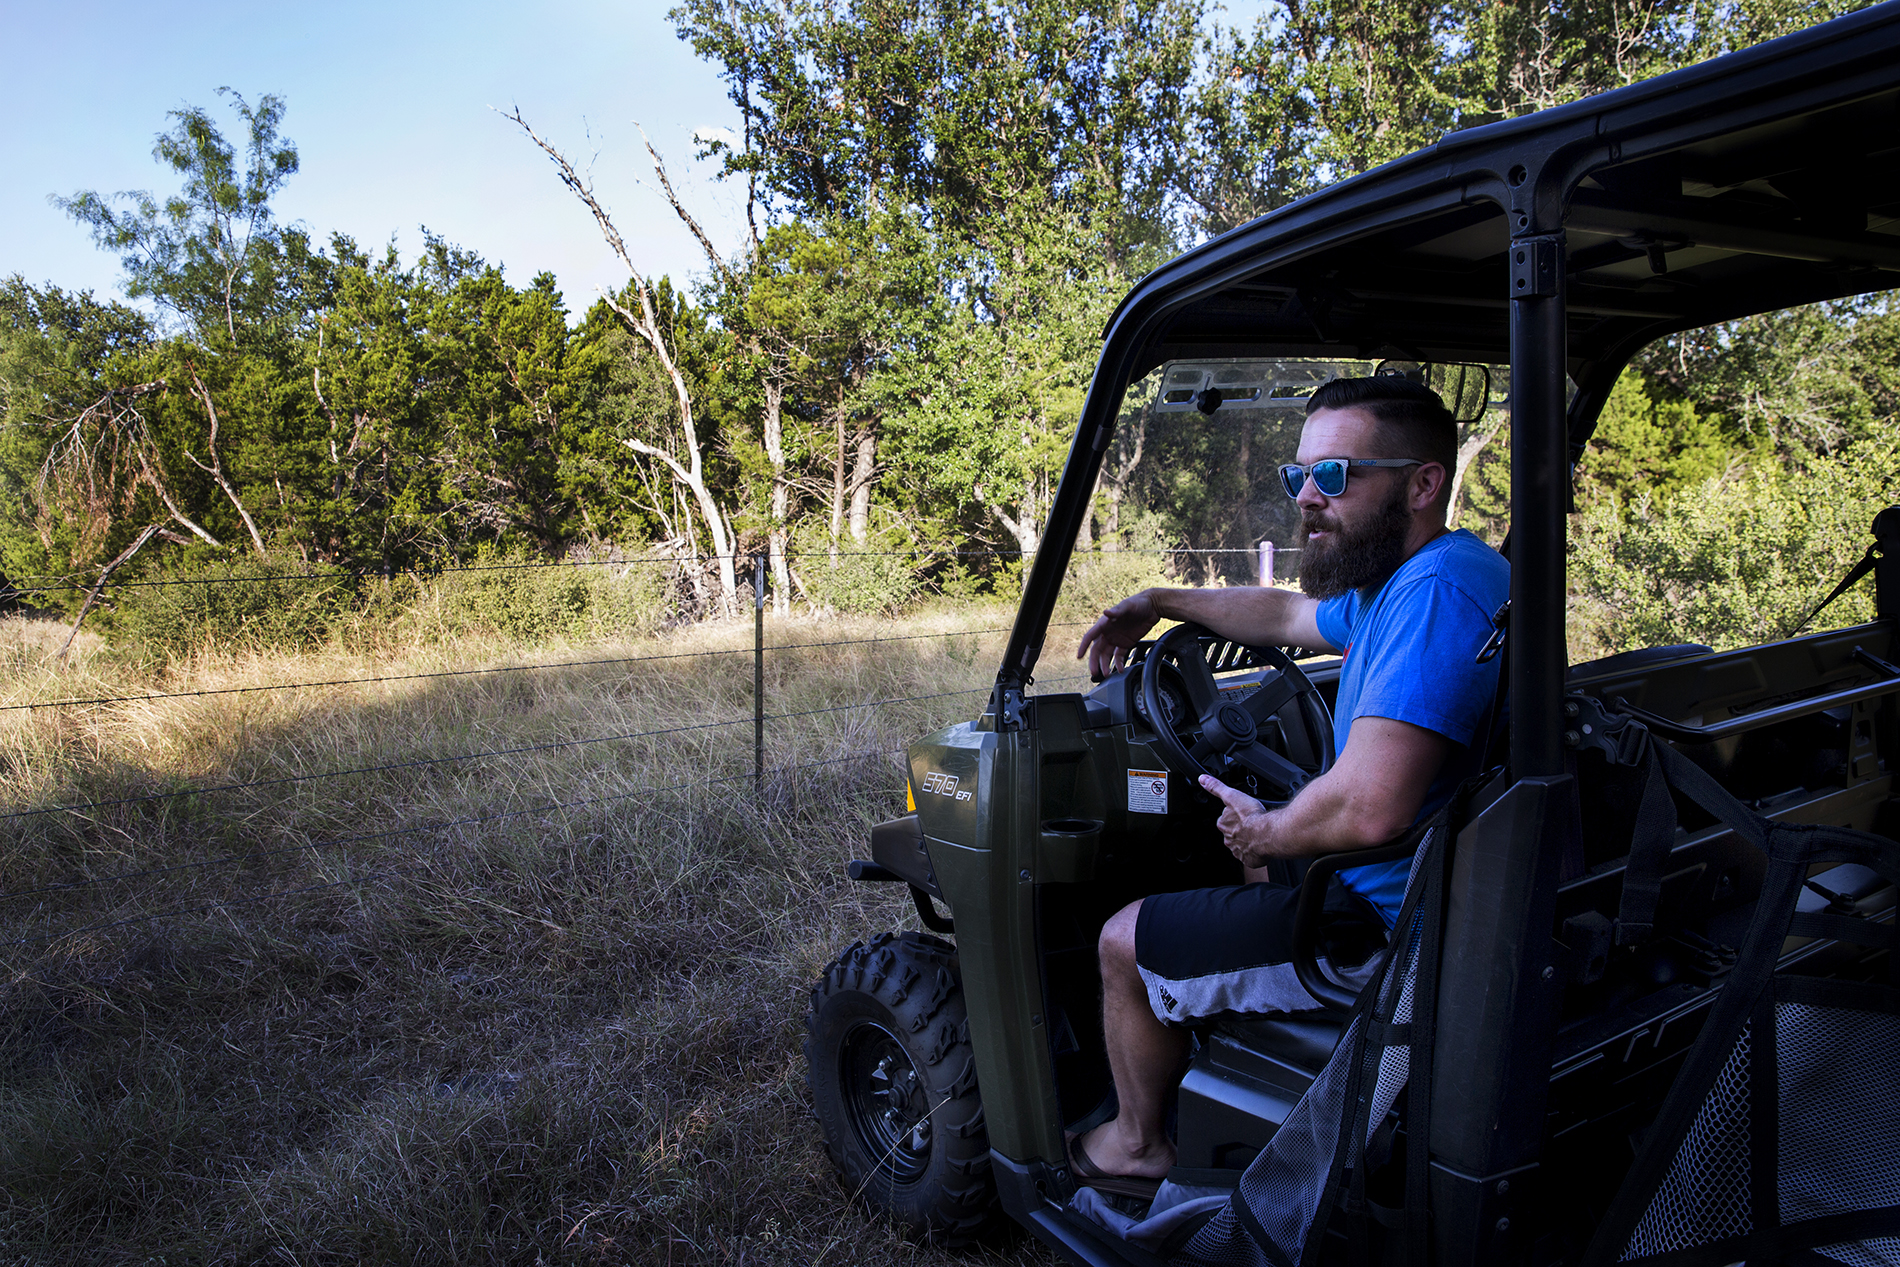 Double Horn resident Jason Welch, a gastrointestinal doctor, rides up to the fence line with a four-wheeler on his property near his home in Double Horn.